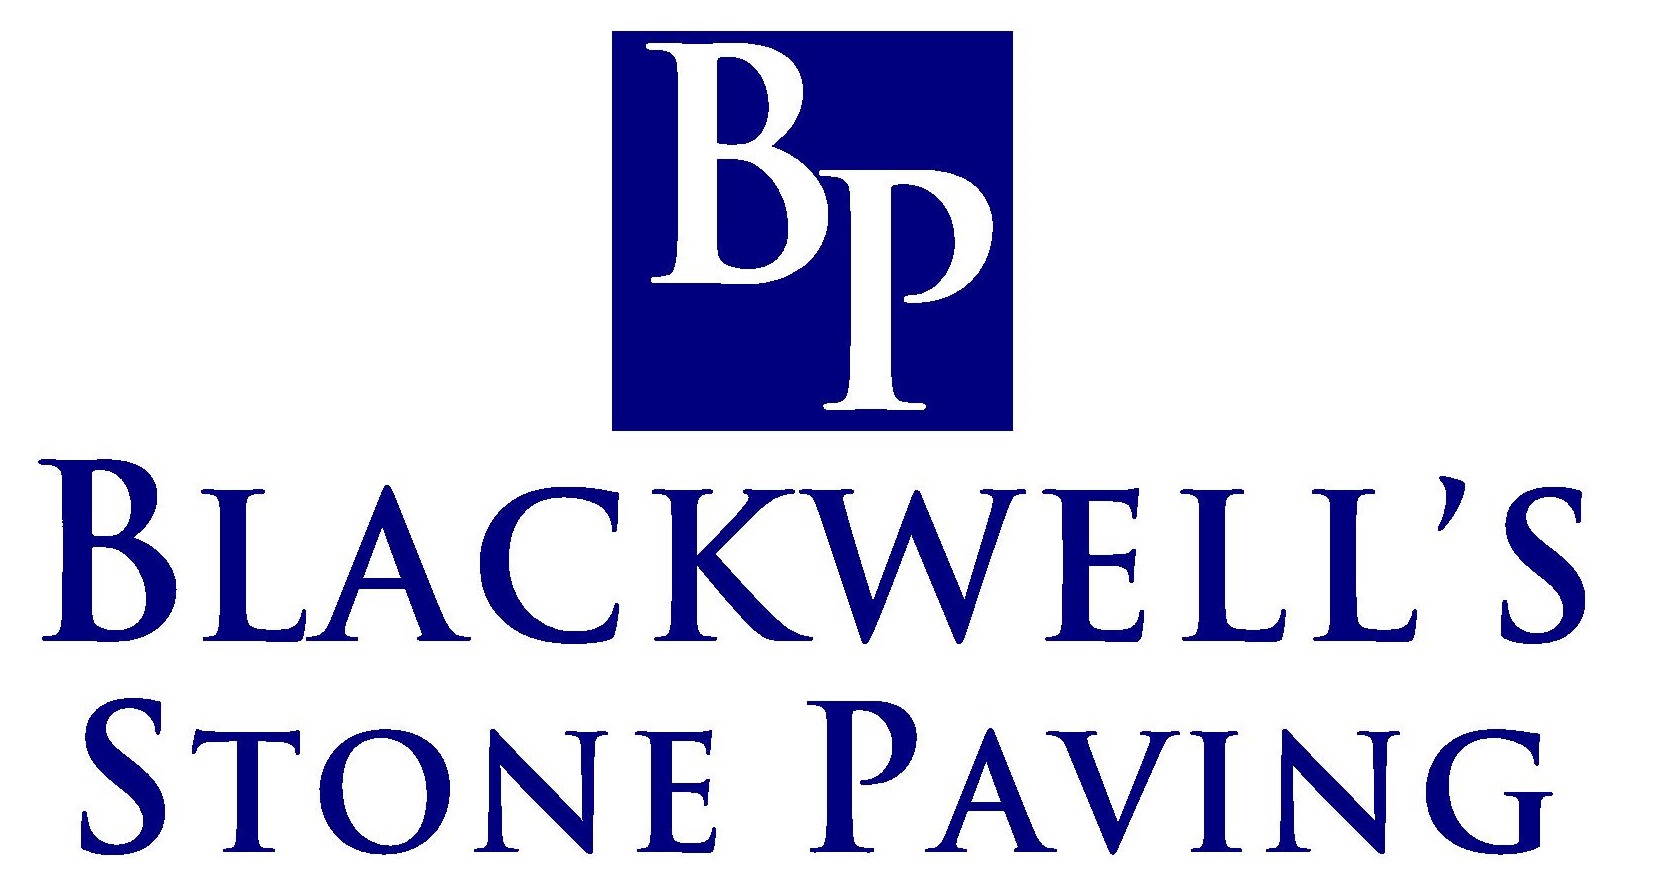 Blackwell's Stone Paving are suppliers of paving, natural stone paving and Indian sandstone